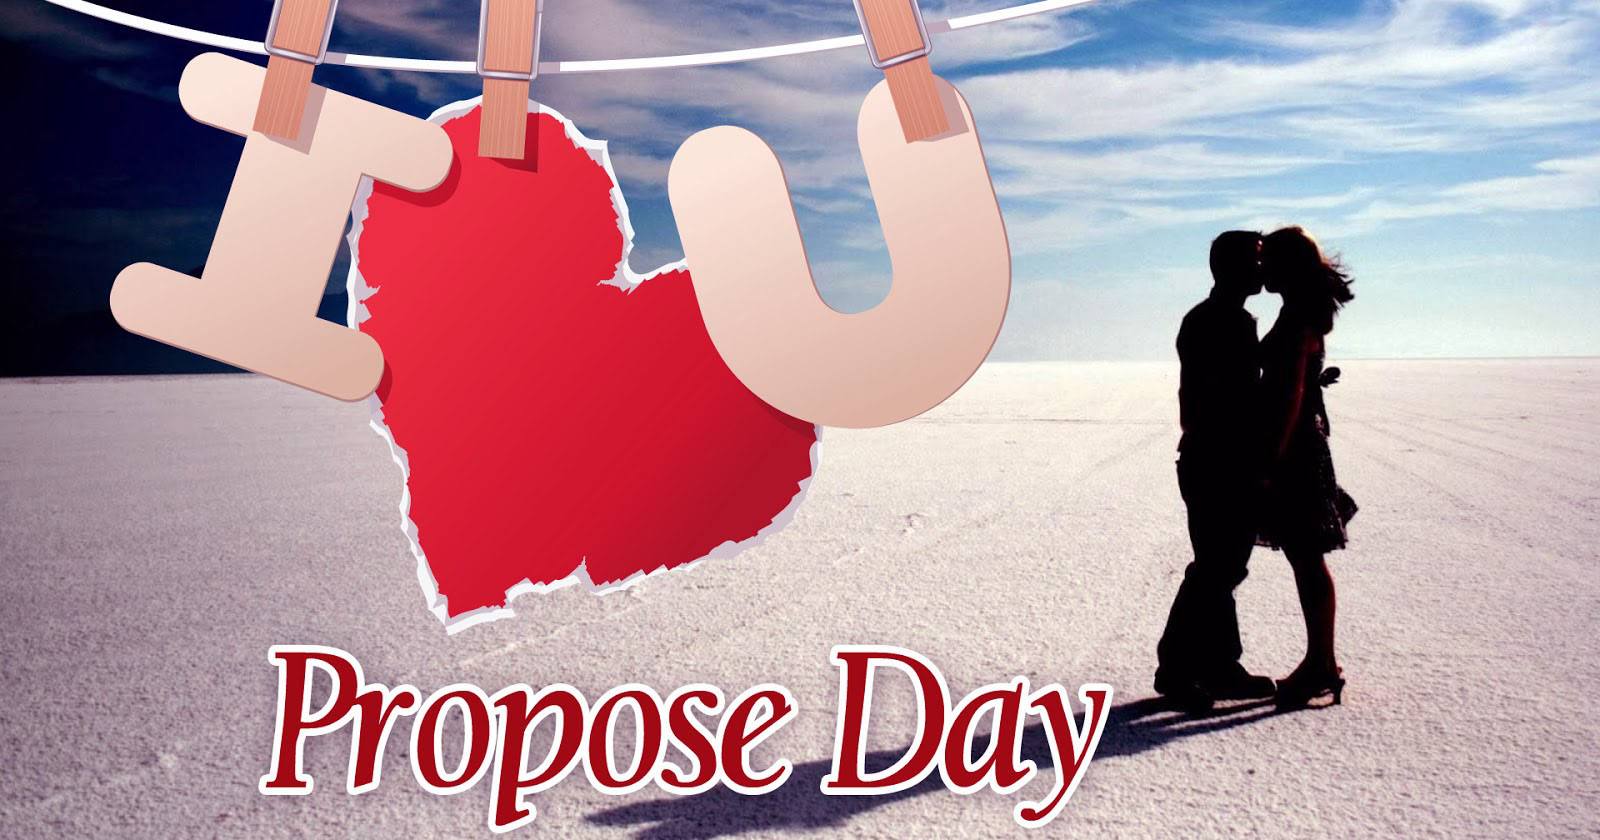 i love you happy propose day